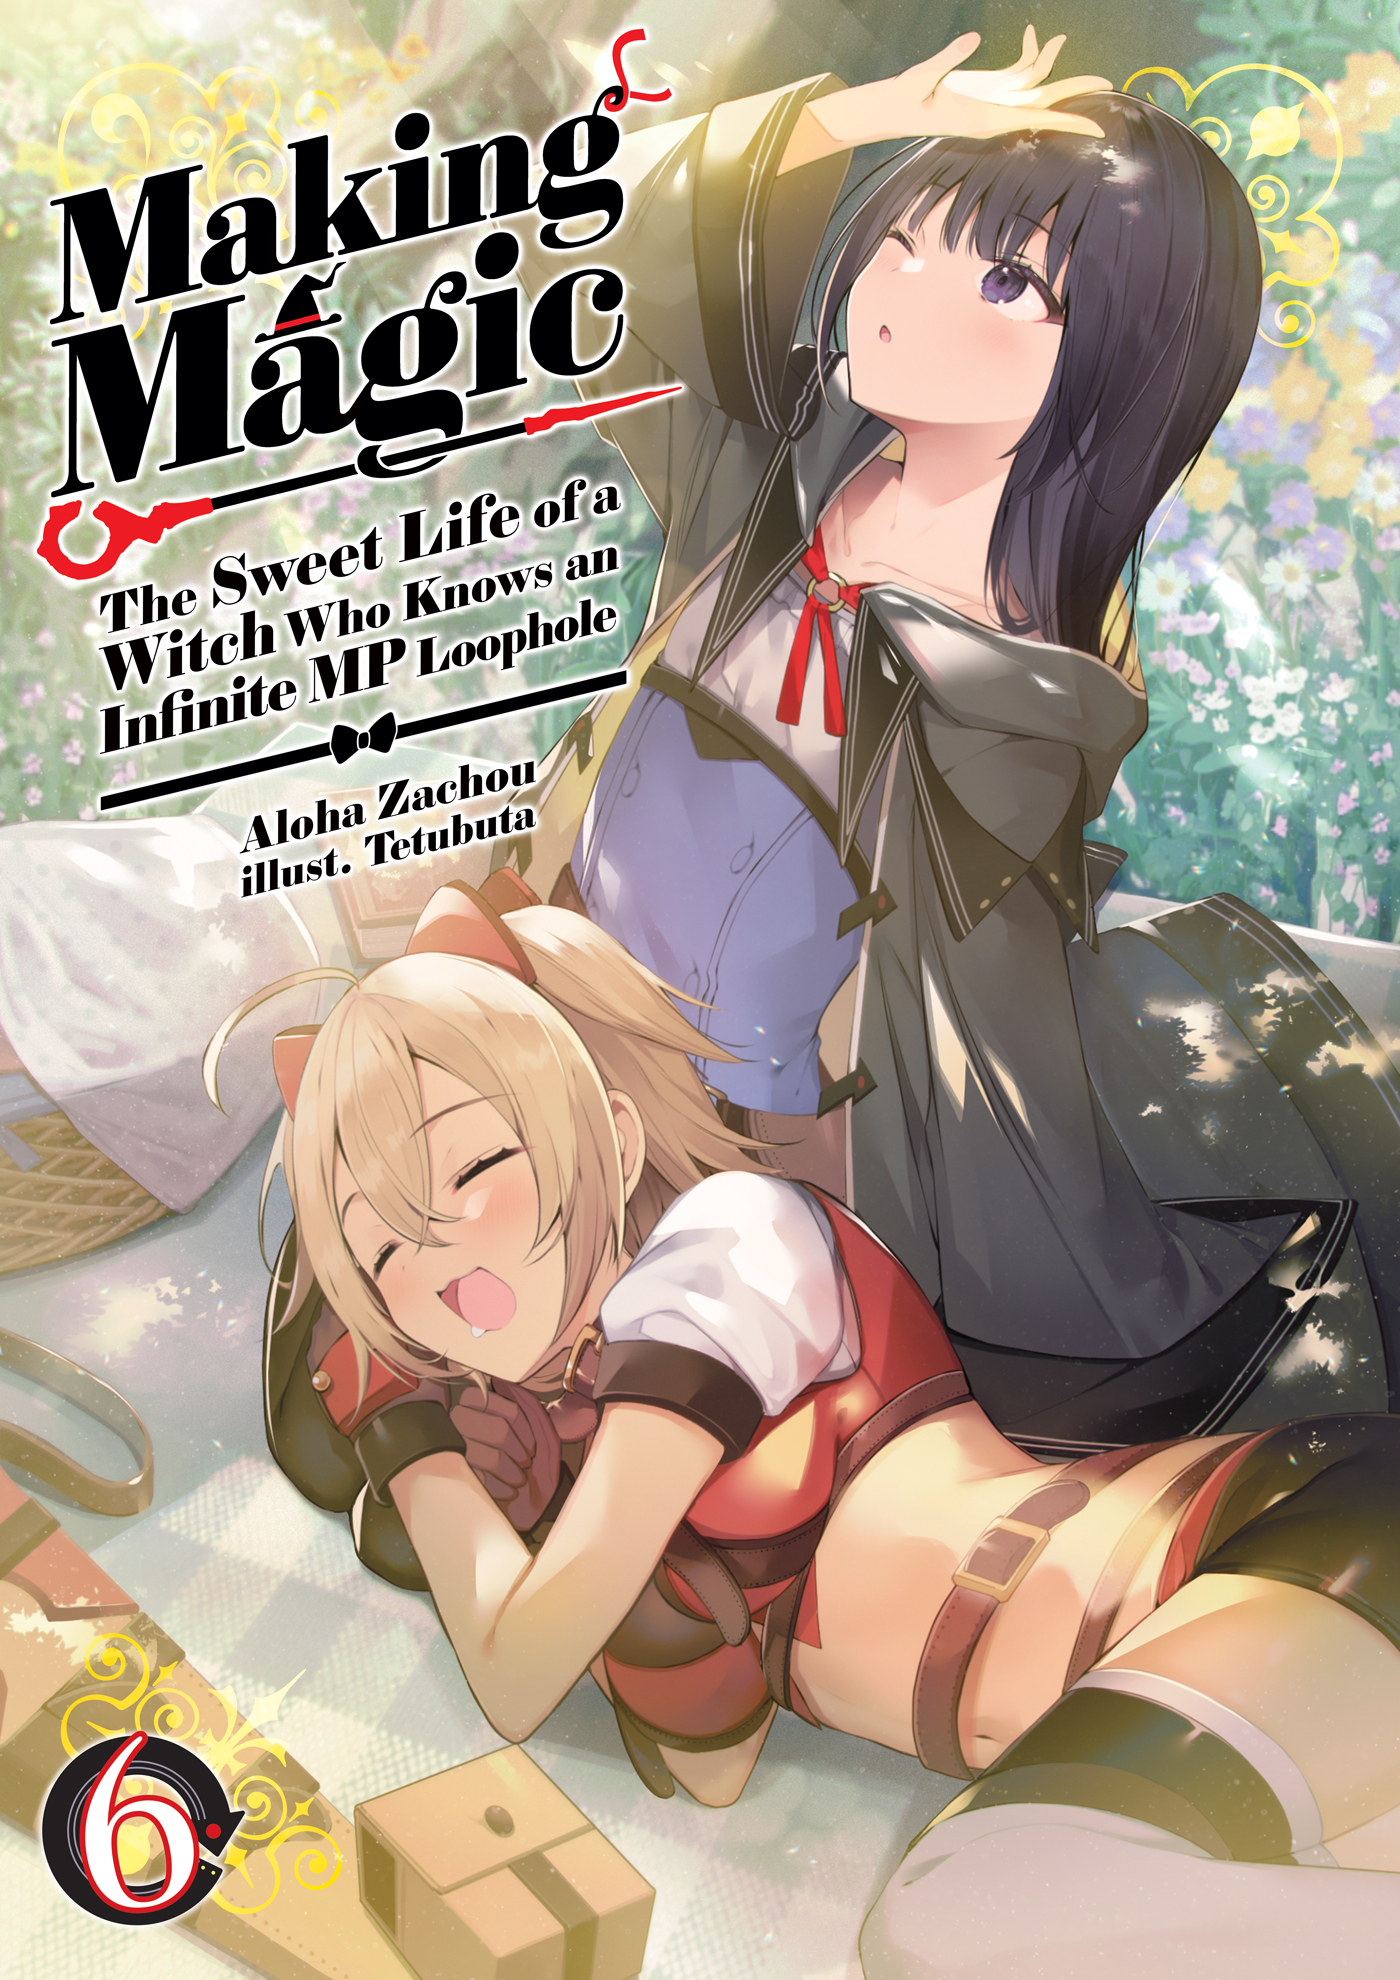 Making Magic: The Sweet Life of a Witch Who Knows an Infinite MP Loophole #006